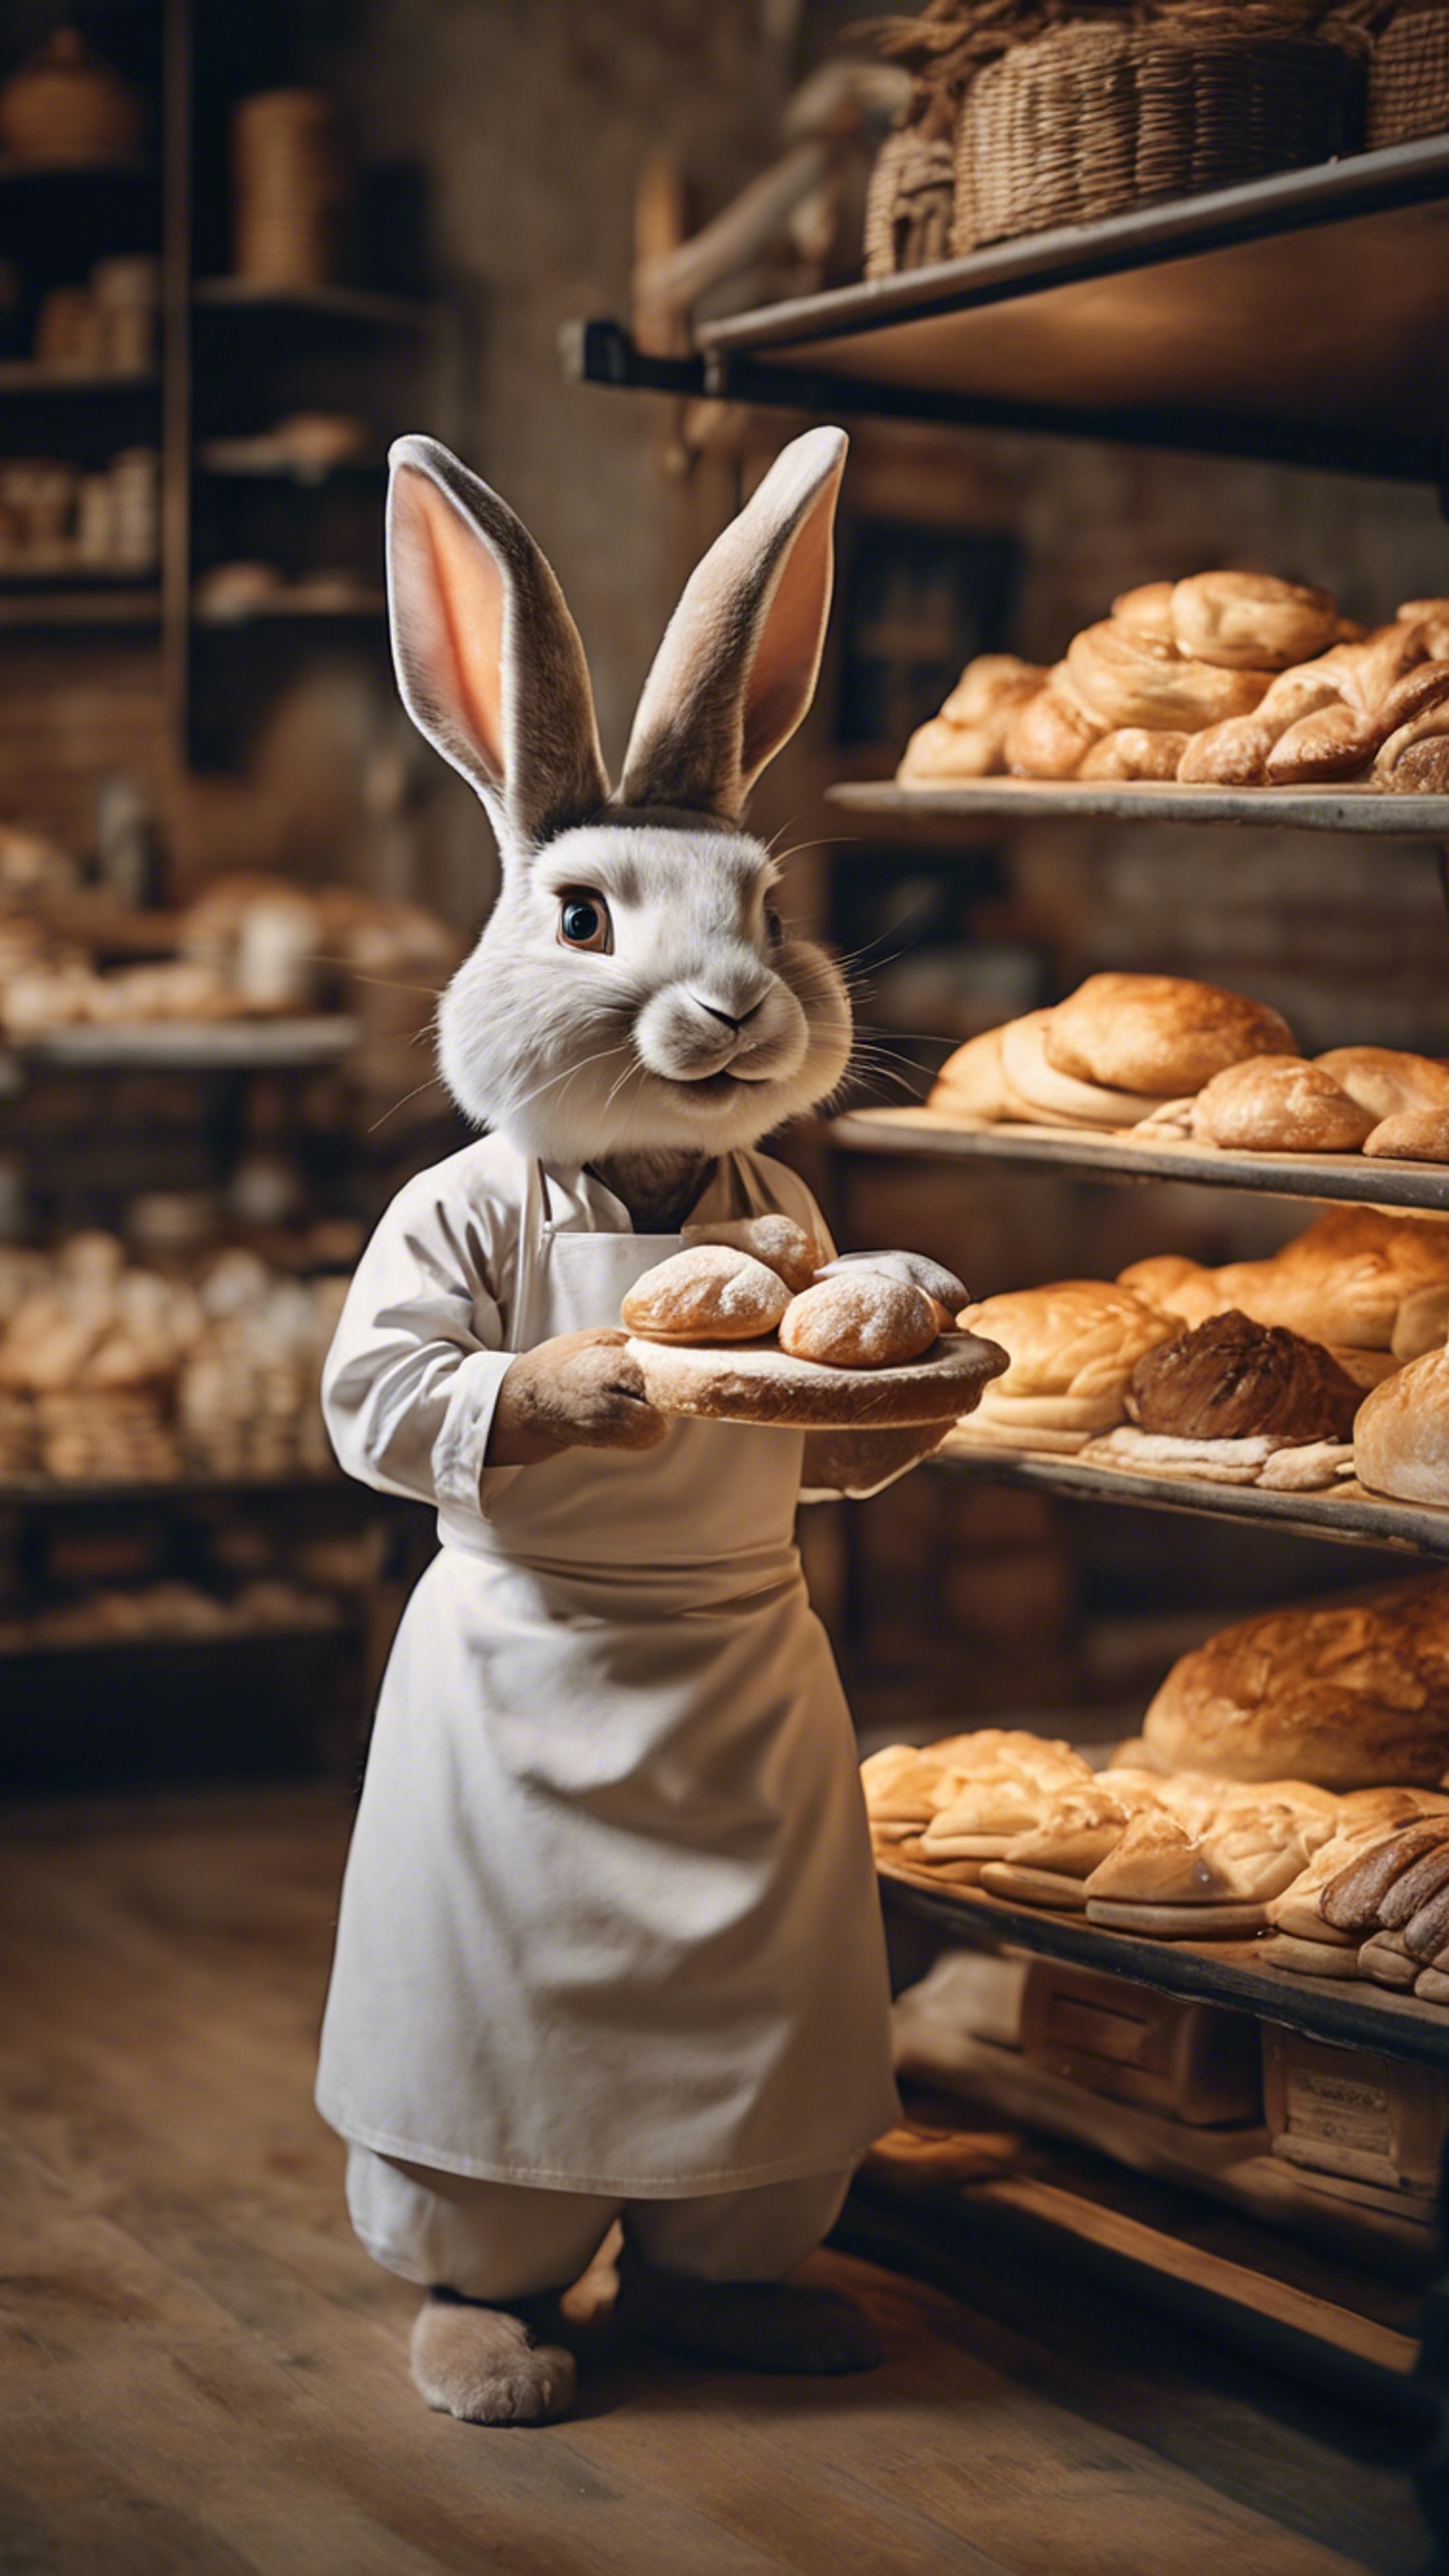 A rabbit baker displaying freshly-baked goods in a charming bakery. 벽지[908b61b6762c4c248f7e]